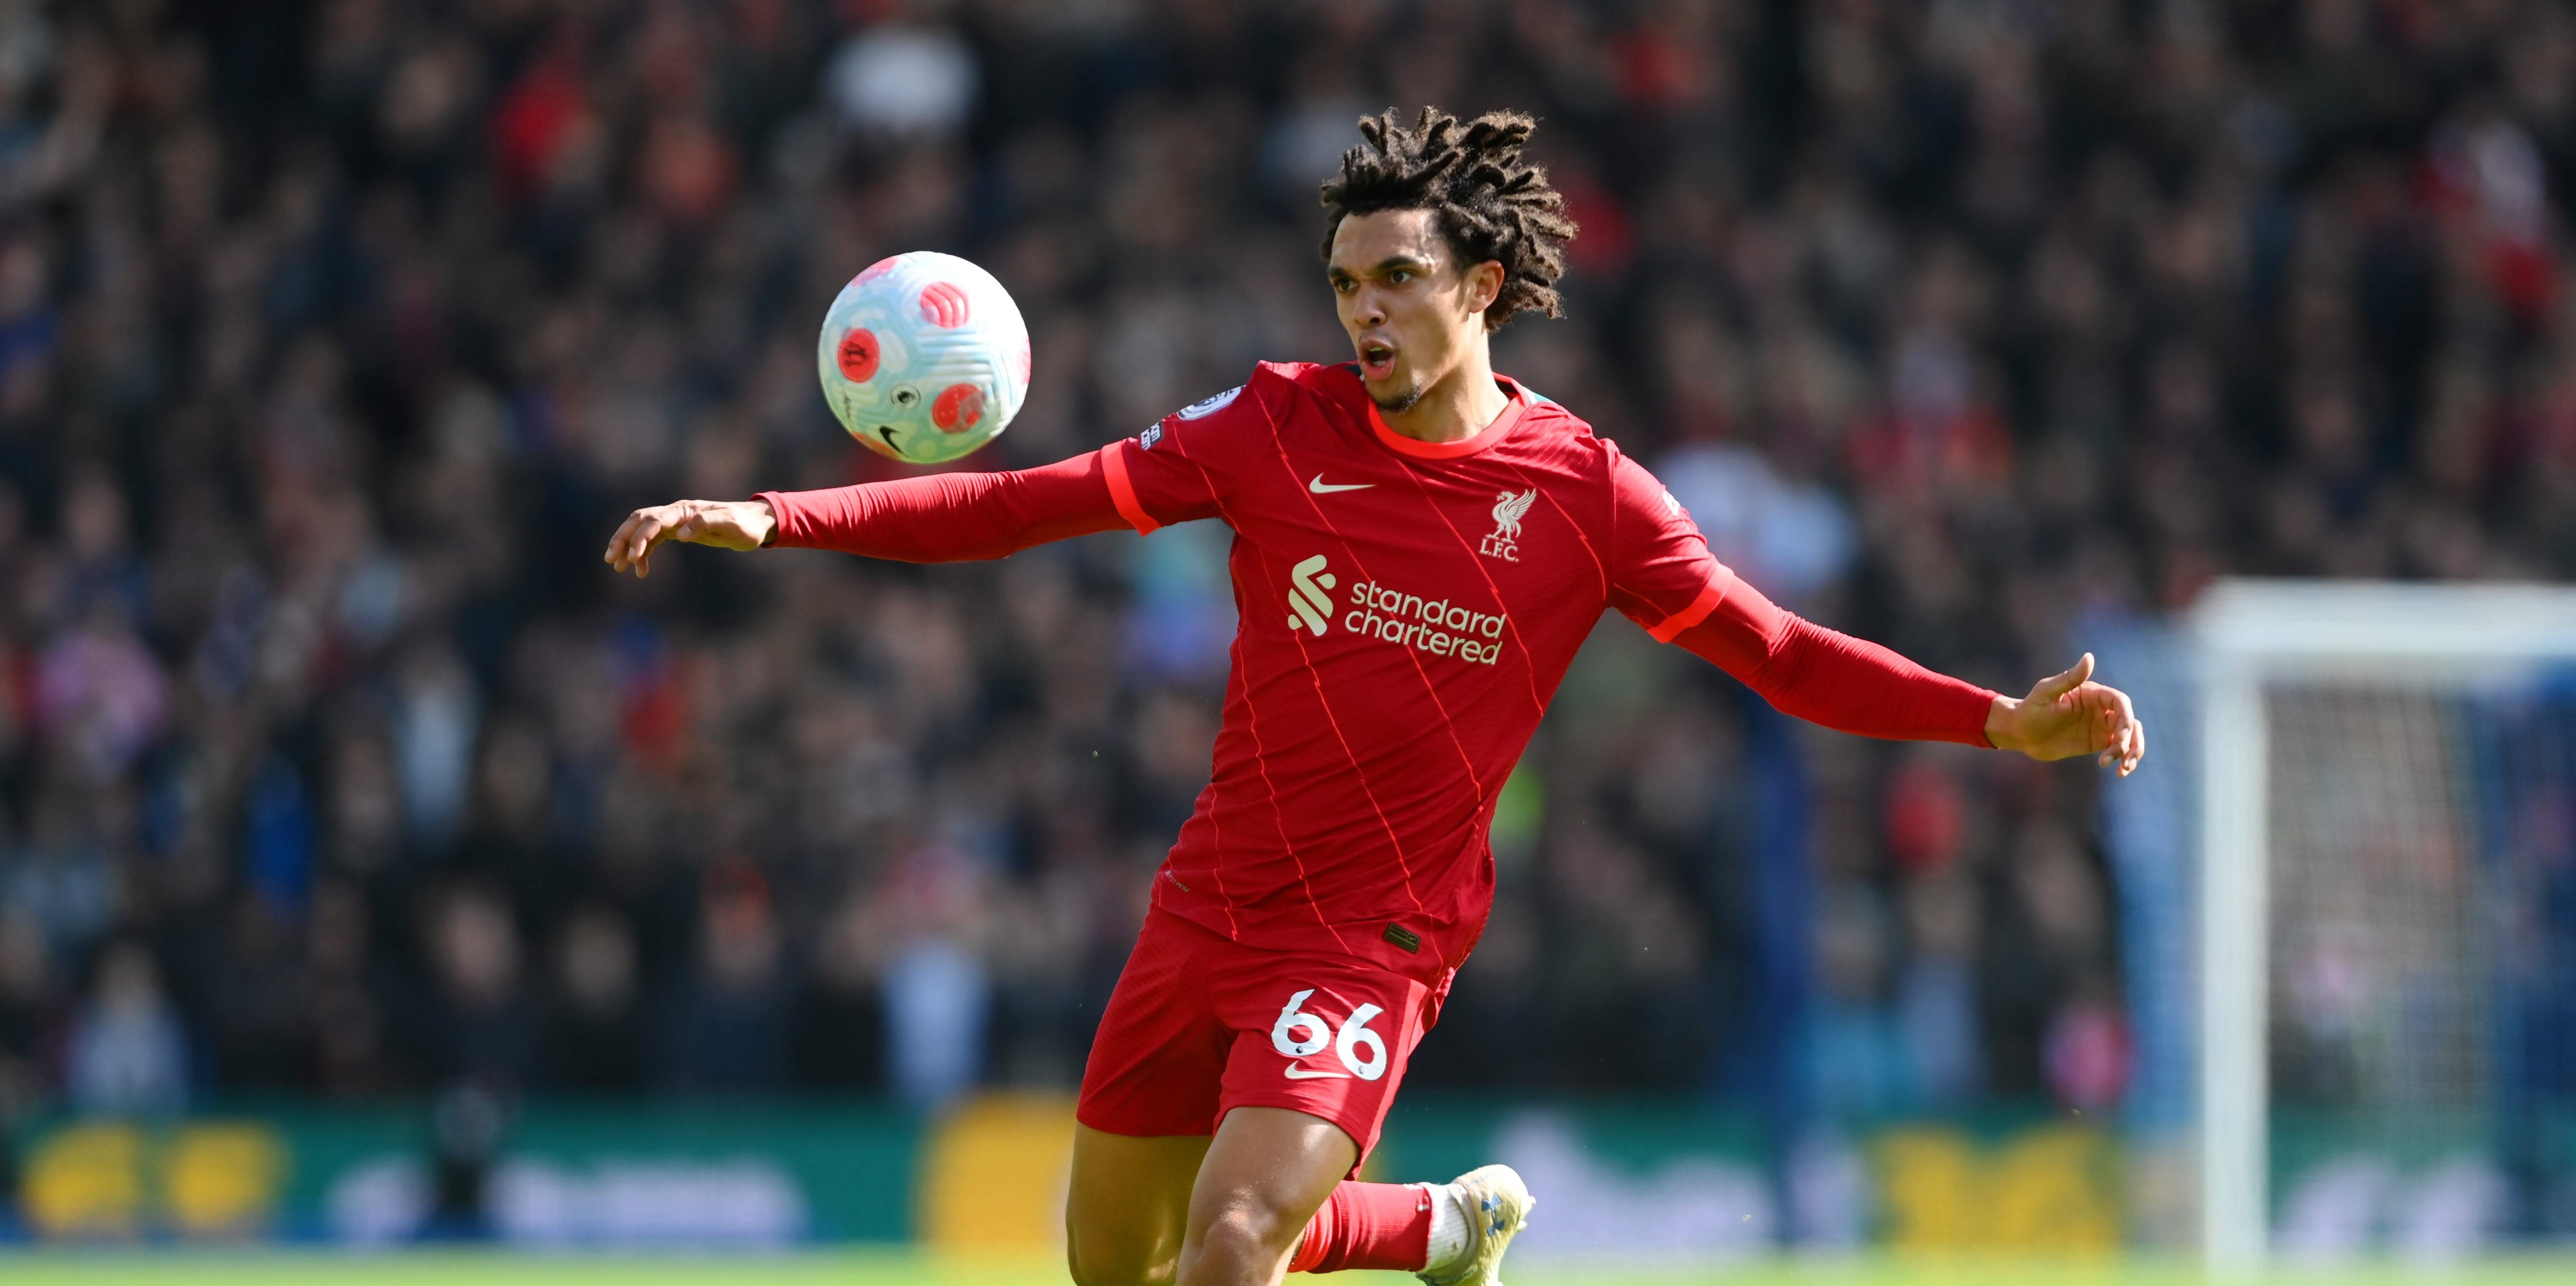 Ex-Red weighs in on the Trent Alexander-Arnold and Reece James debate and explains who he believes is the ‘better’ of the pair